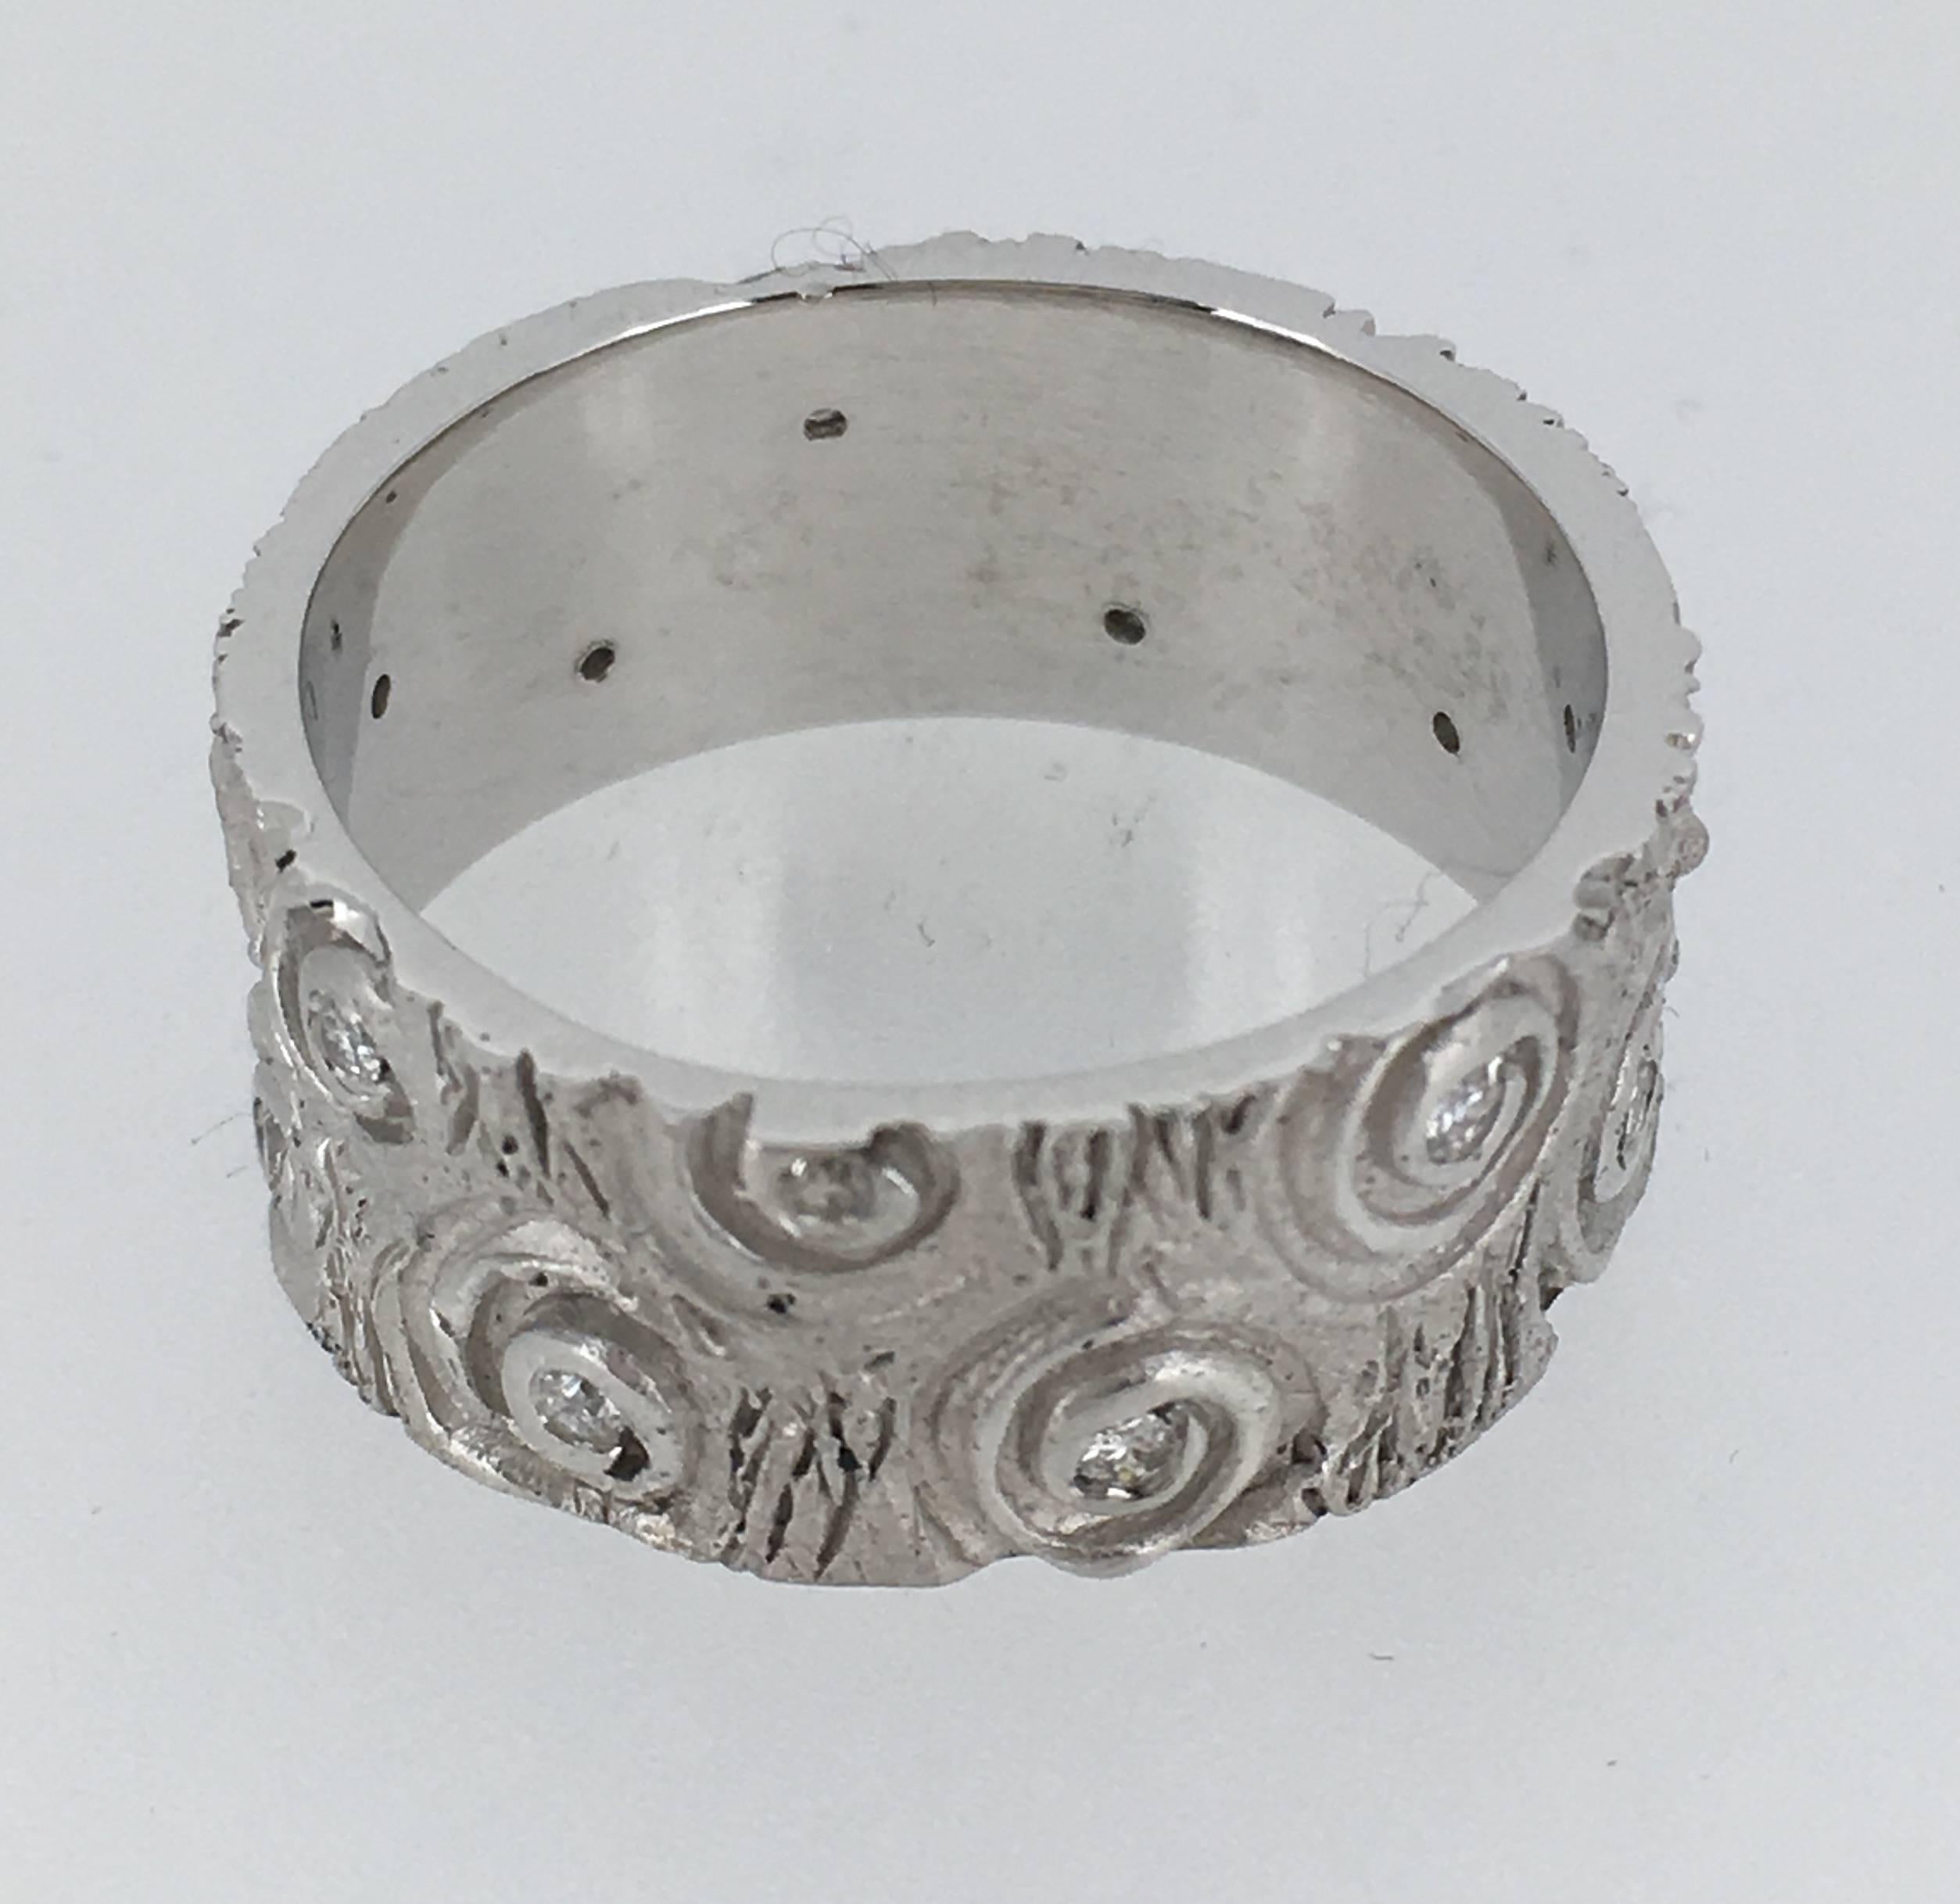 This is a gorgeous engraved wedding Ring with 13 diamonds of total 0.15ct
It's made of 9.4 gr white Gold.

This unique piece is signed SVG designed and made by Steven in our Antwerp workshop .

The size of the ring is 58 but we can size it to